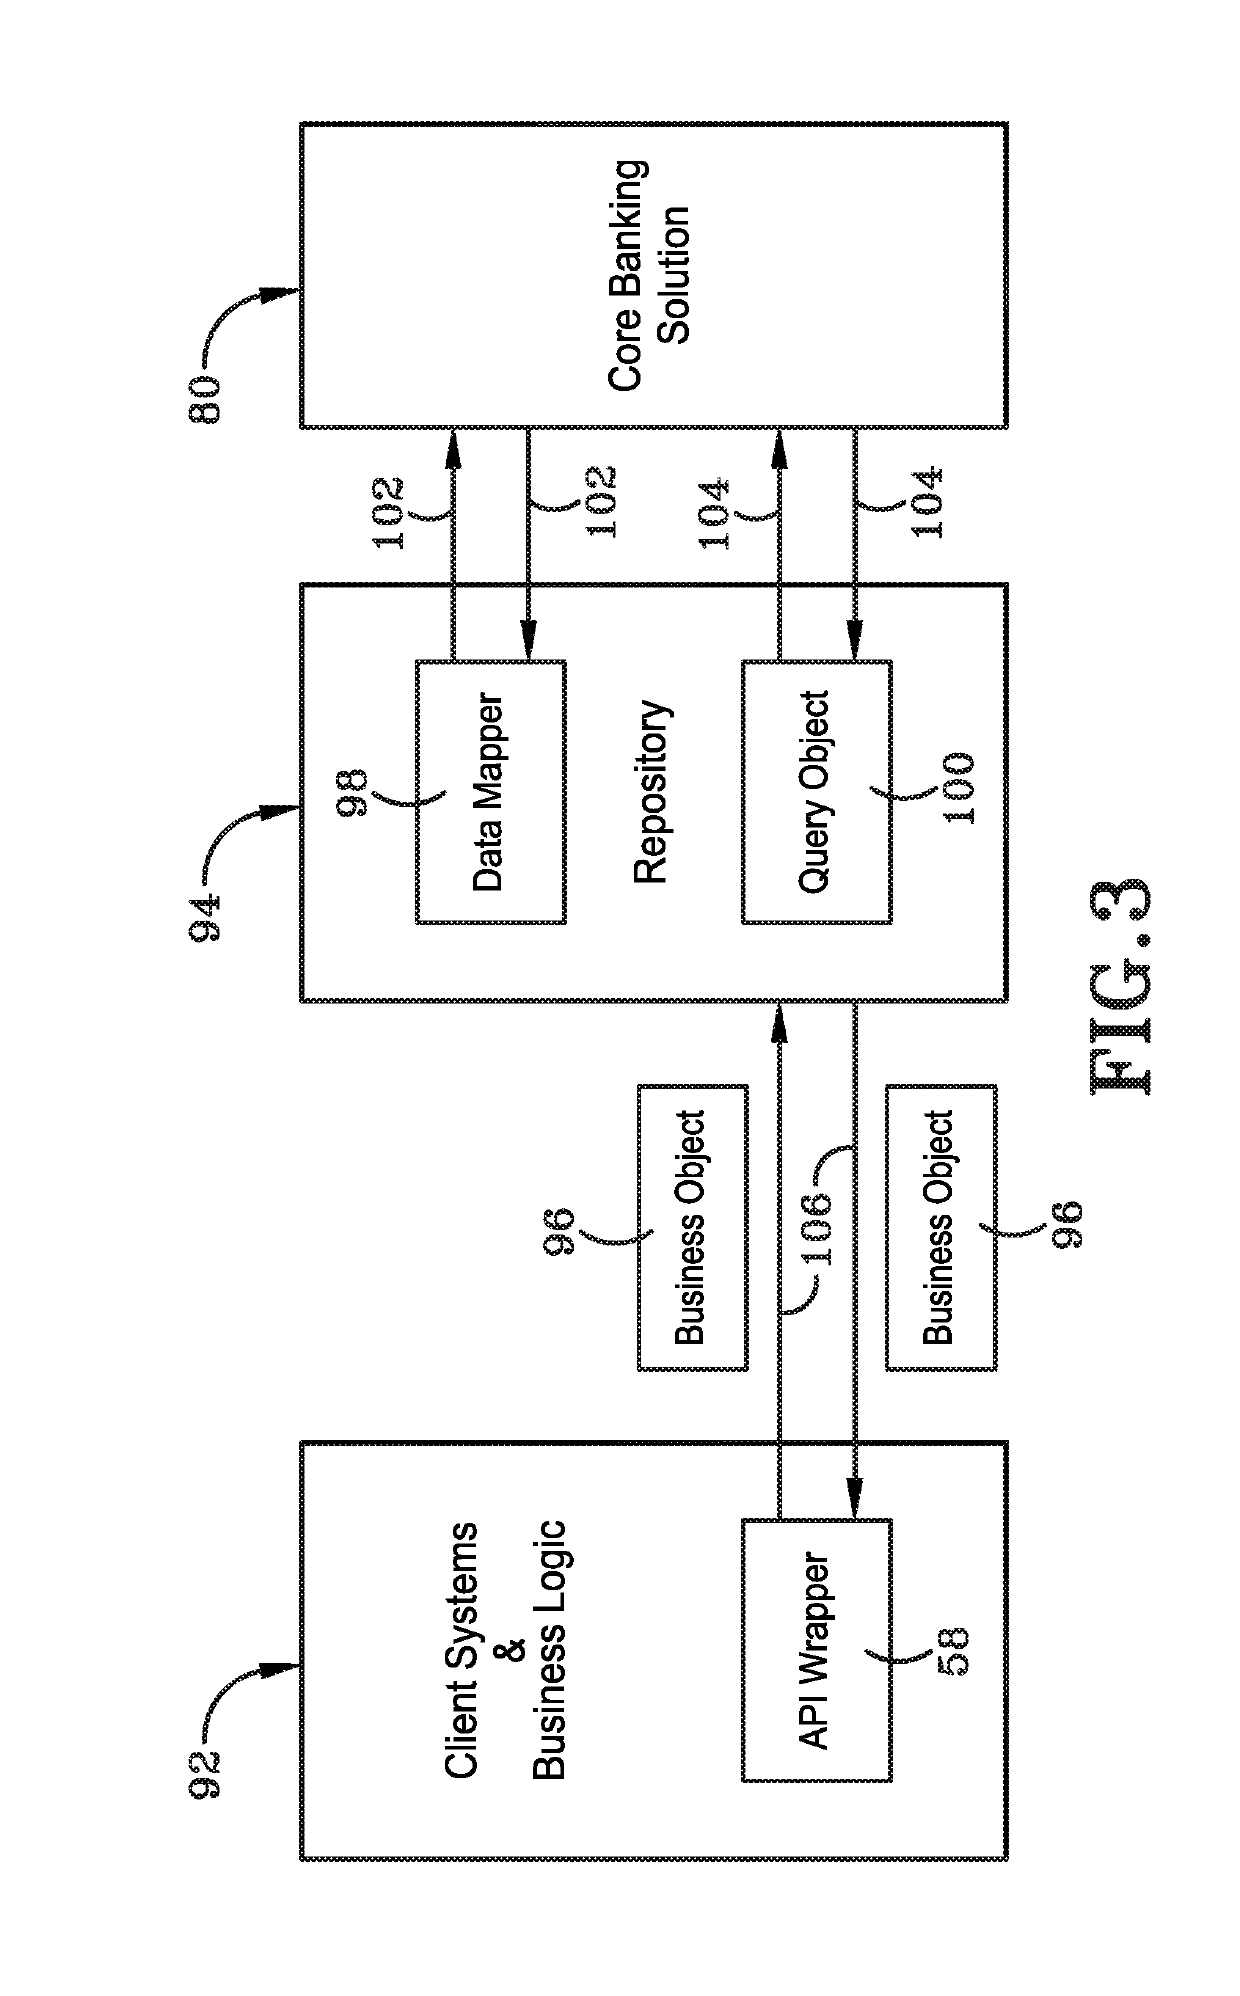 System and method for cost sharing